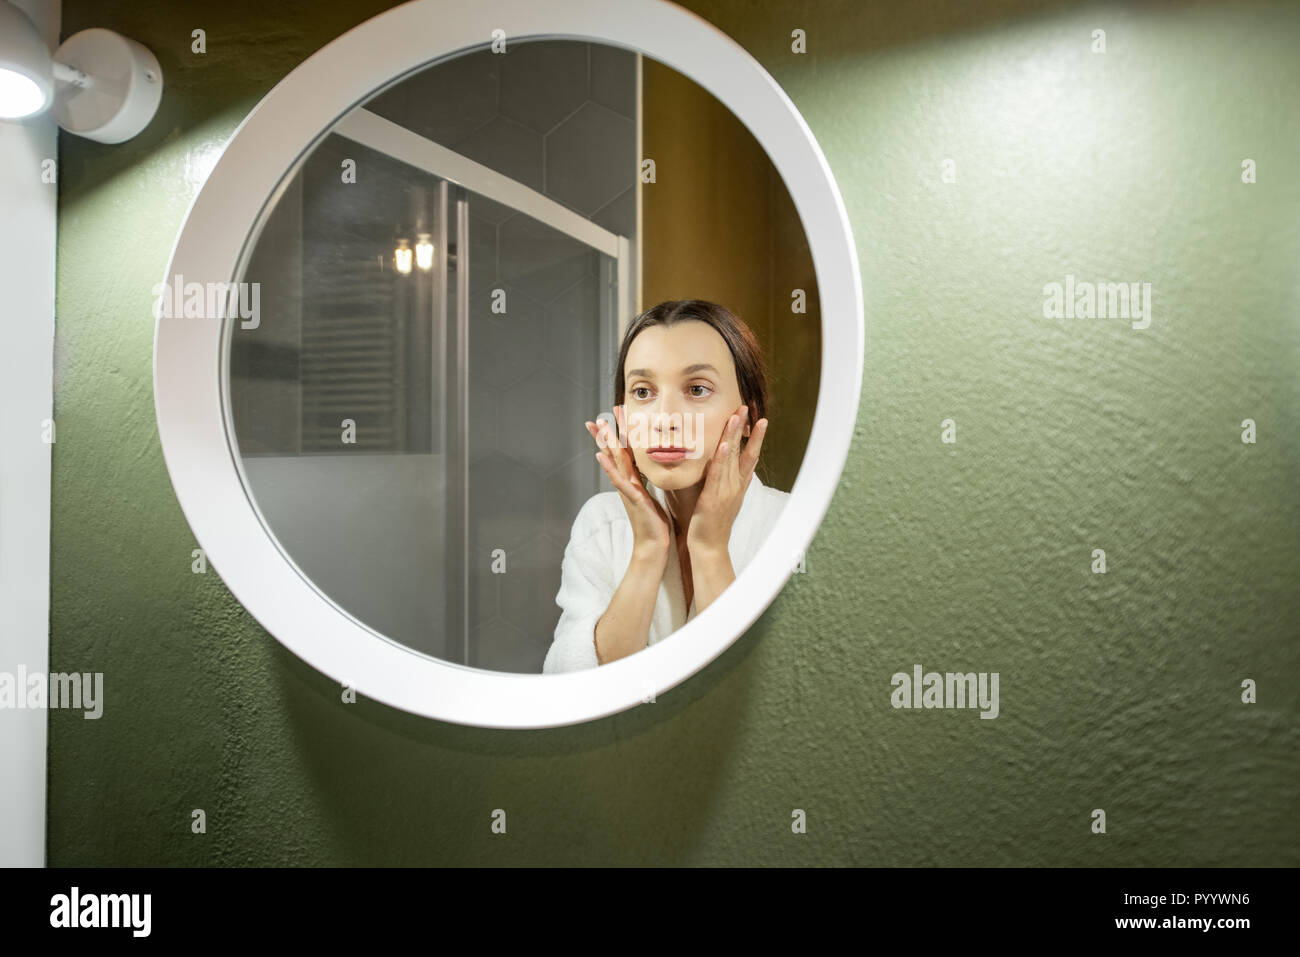 Woman In Bathrobe Making Facial Massage Looking Into The Round Mirror In The Bathroom Stock